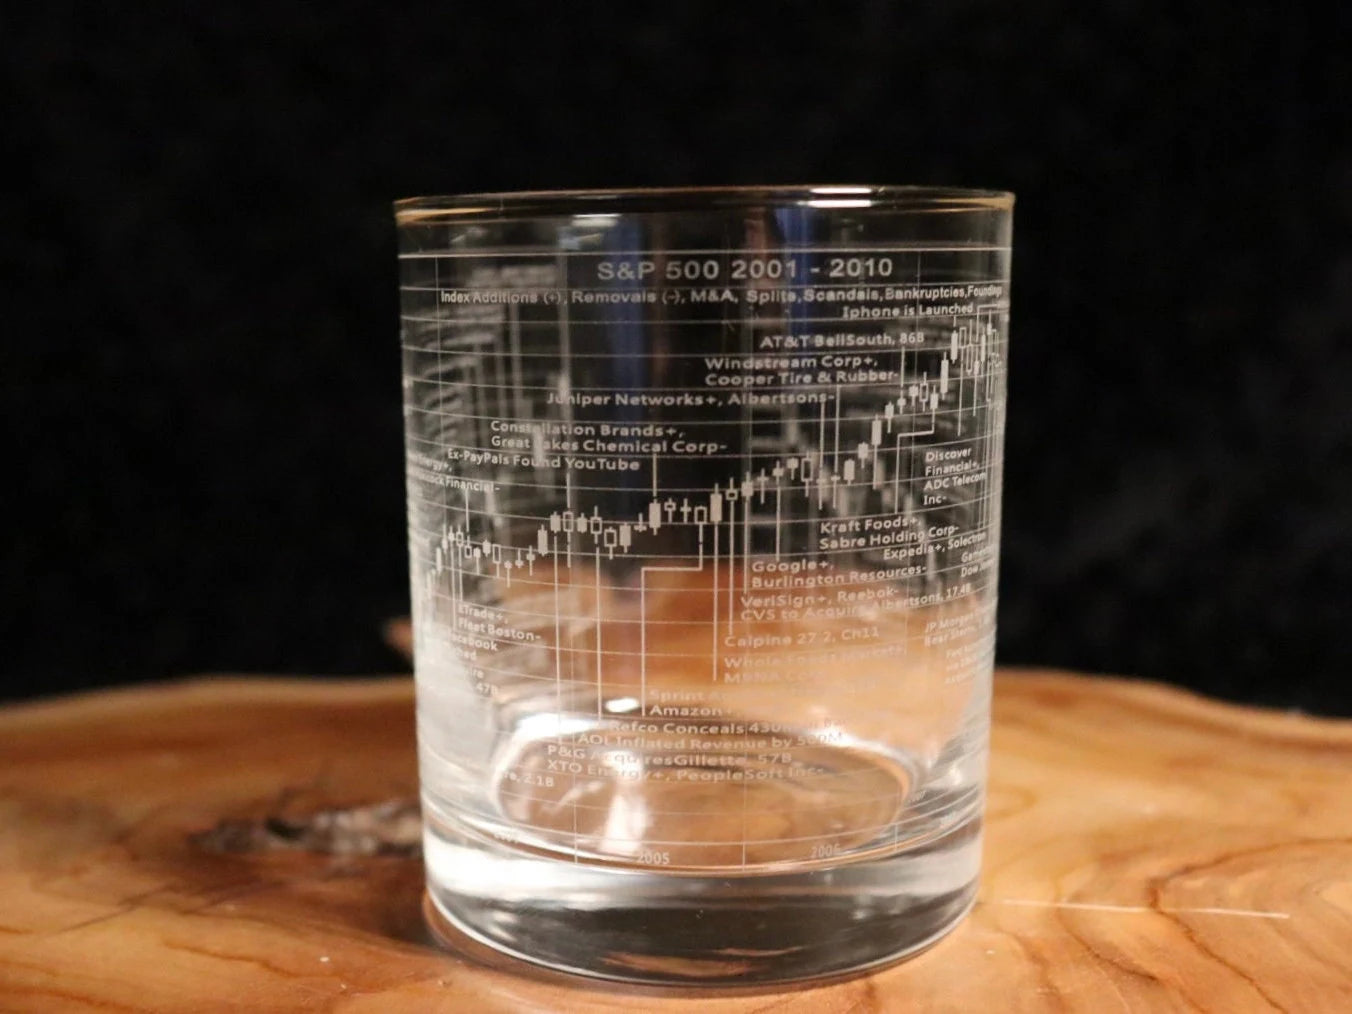 LIMITED-EDITION S&P 500 Historical Charts Glassware - 2 Glasswares - 2 Decades